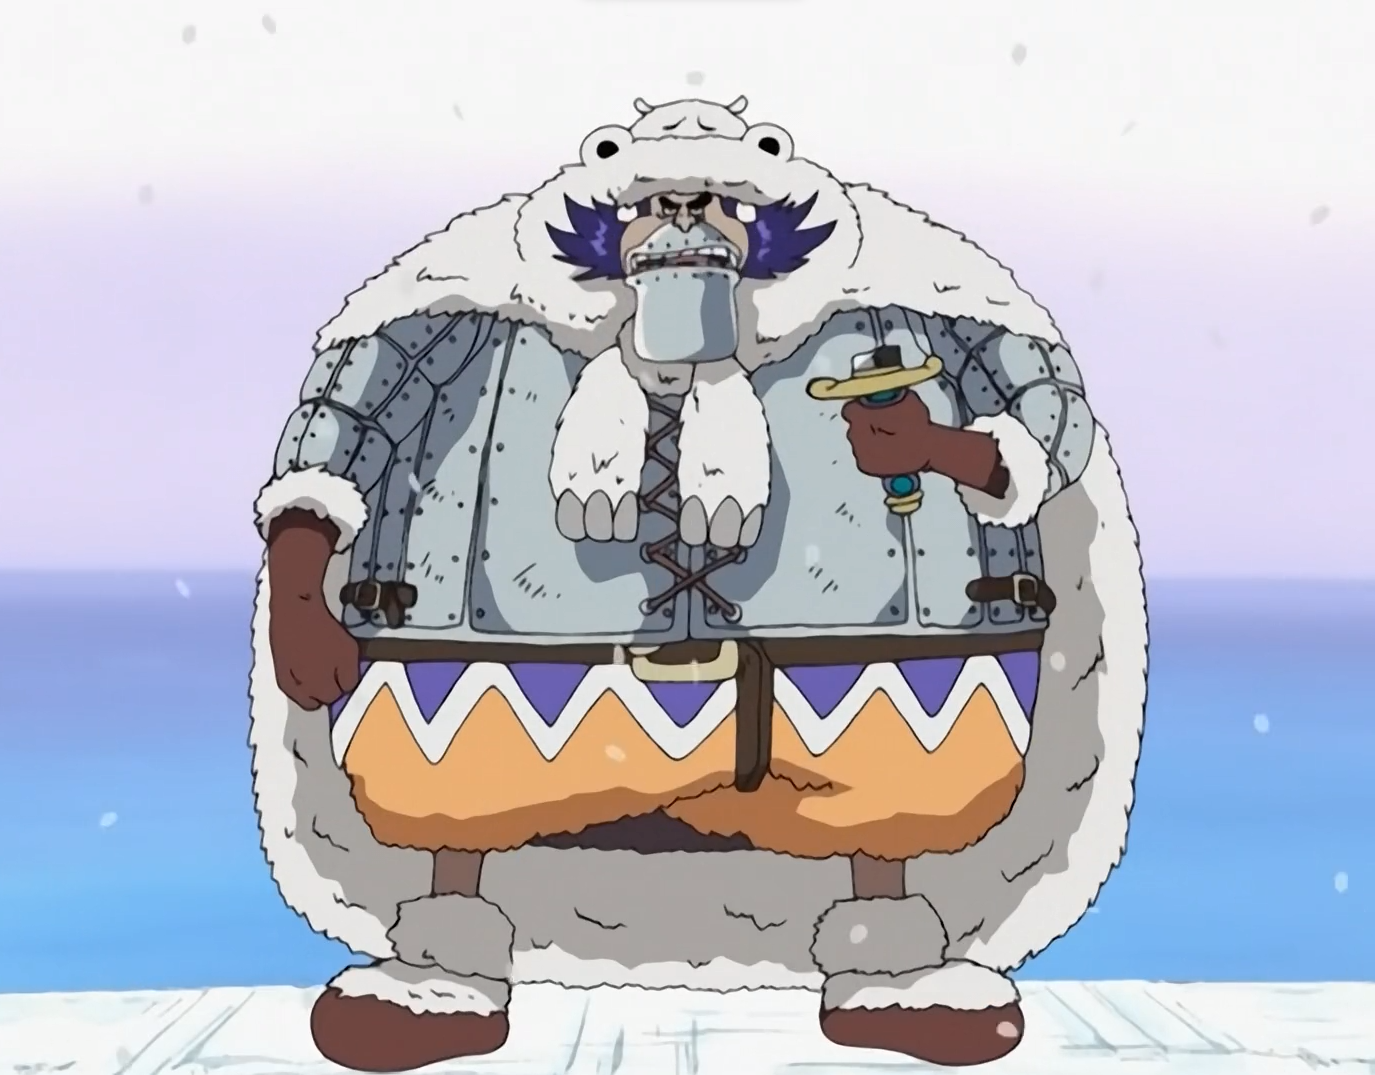 One Piece Captain Wapol first appears in front of the Straw Hats